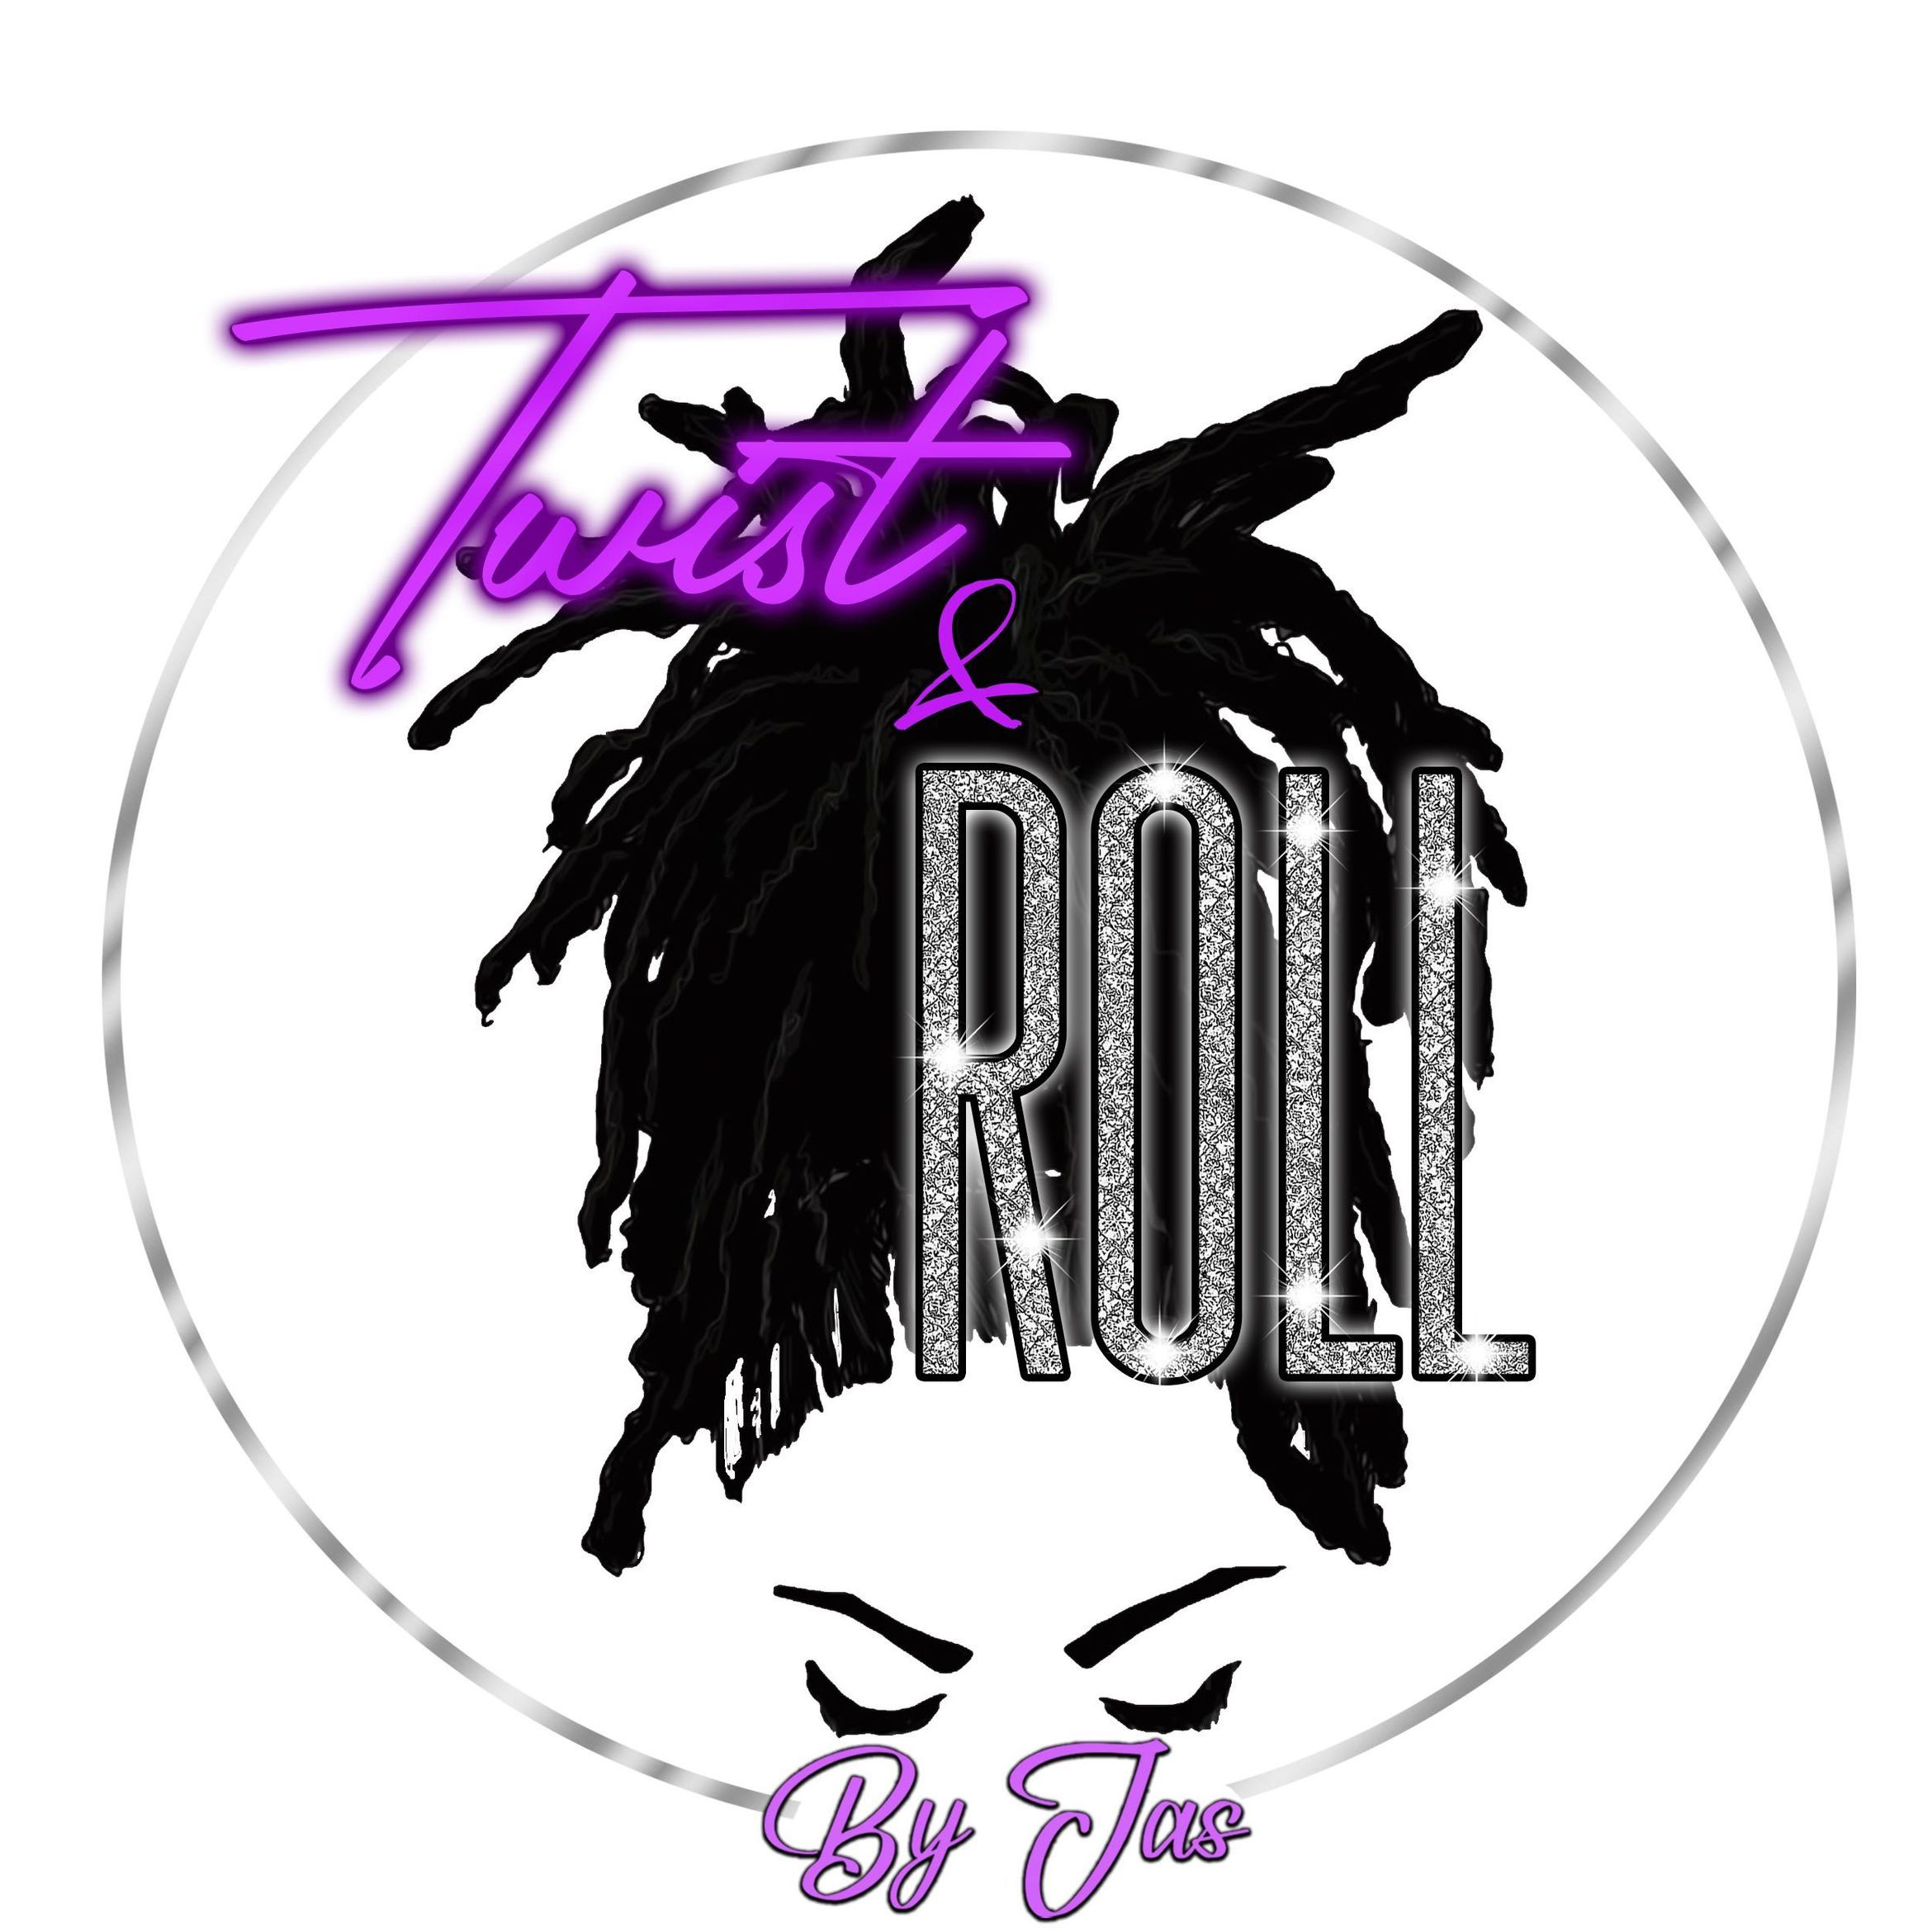 Twist and Roll by Jas, 12440 Oxford Park Dr, B102, Houston, 77082